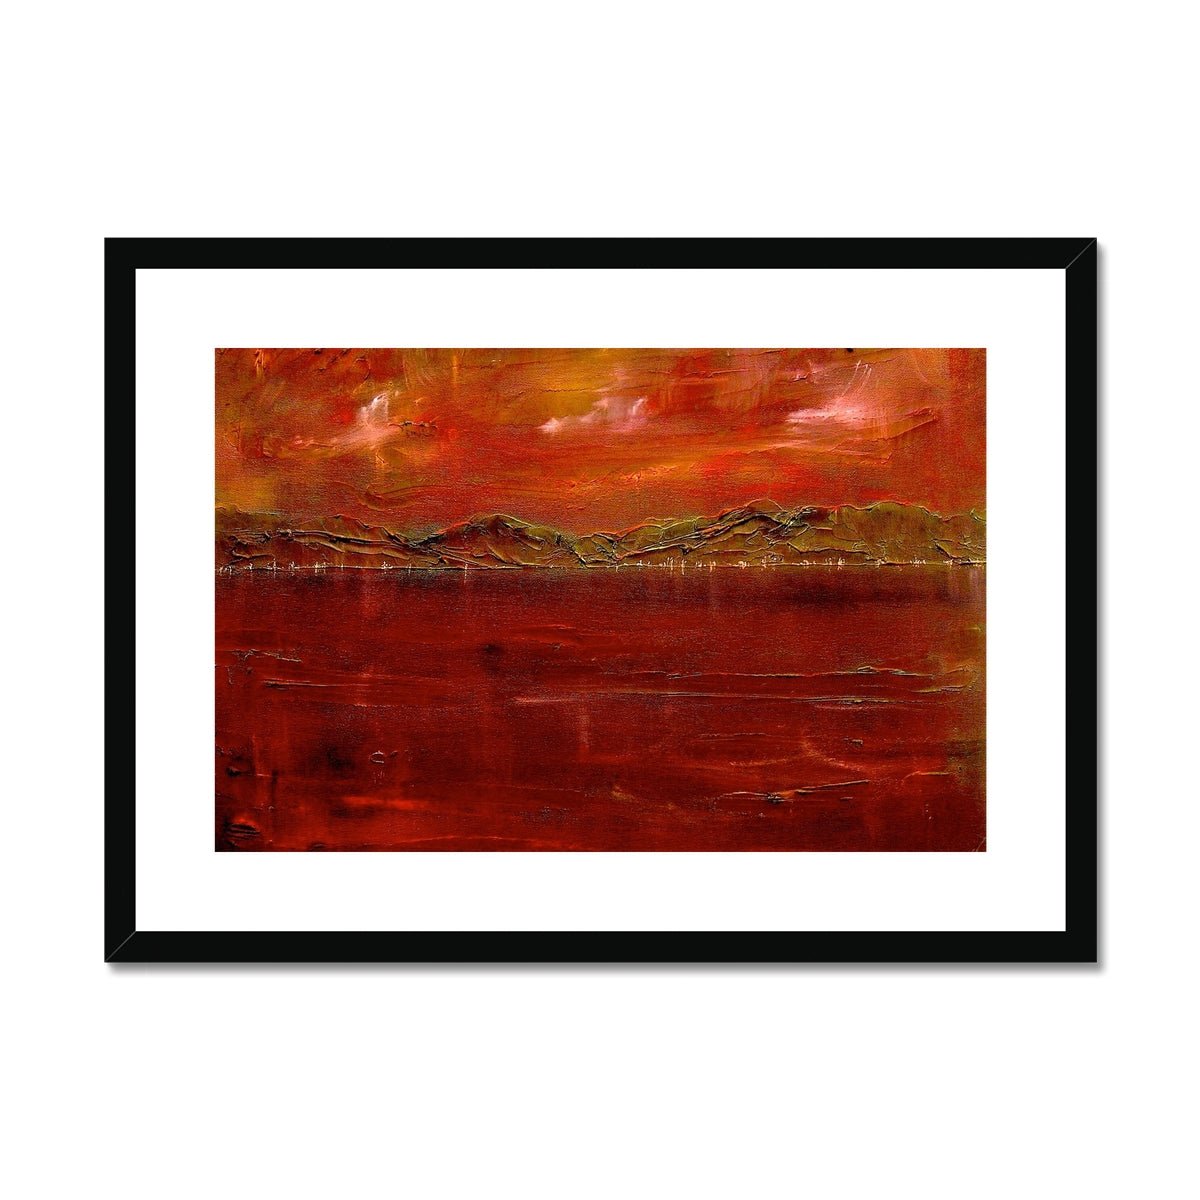 Deep Clyde Dusk Painting | Framed & Mounted Prints From Scotland-Framed & Mounted Prints-River Clyde Art Gallery-A2 Landscape-Black Frame-Paintings, Prints, Homeware, Art Gifts From Scotland By Scottish Artist Kevin Hunter